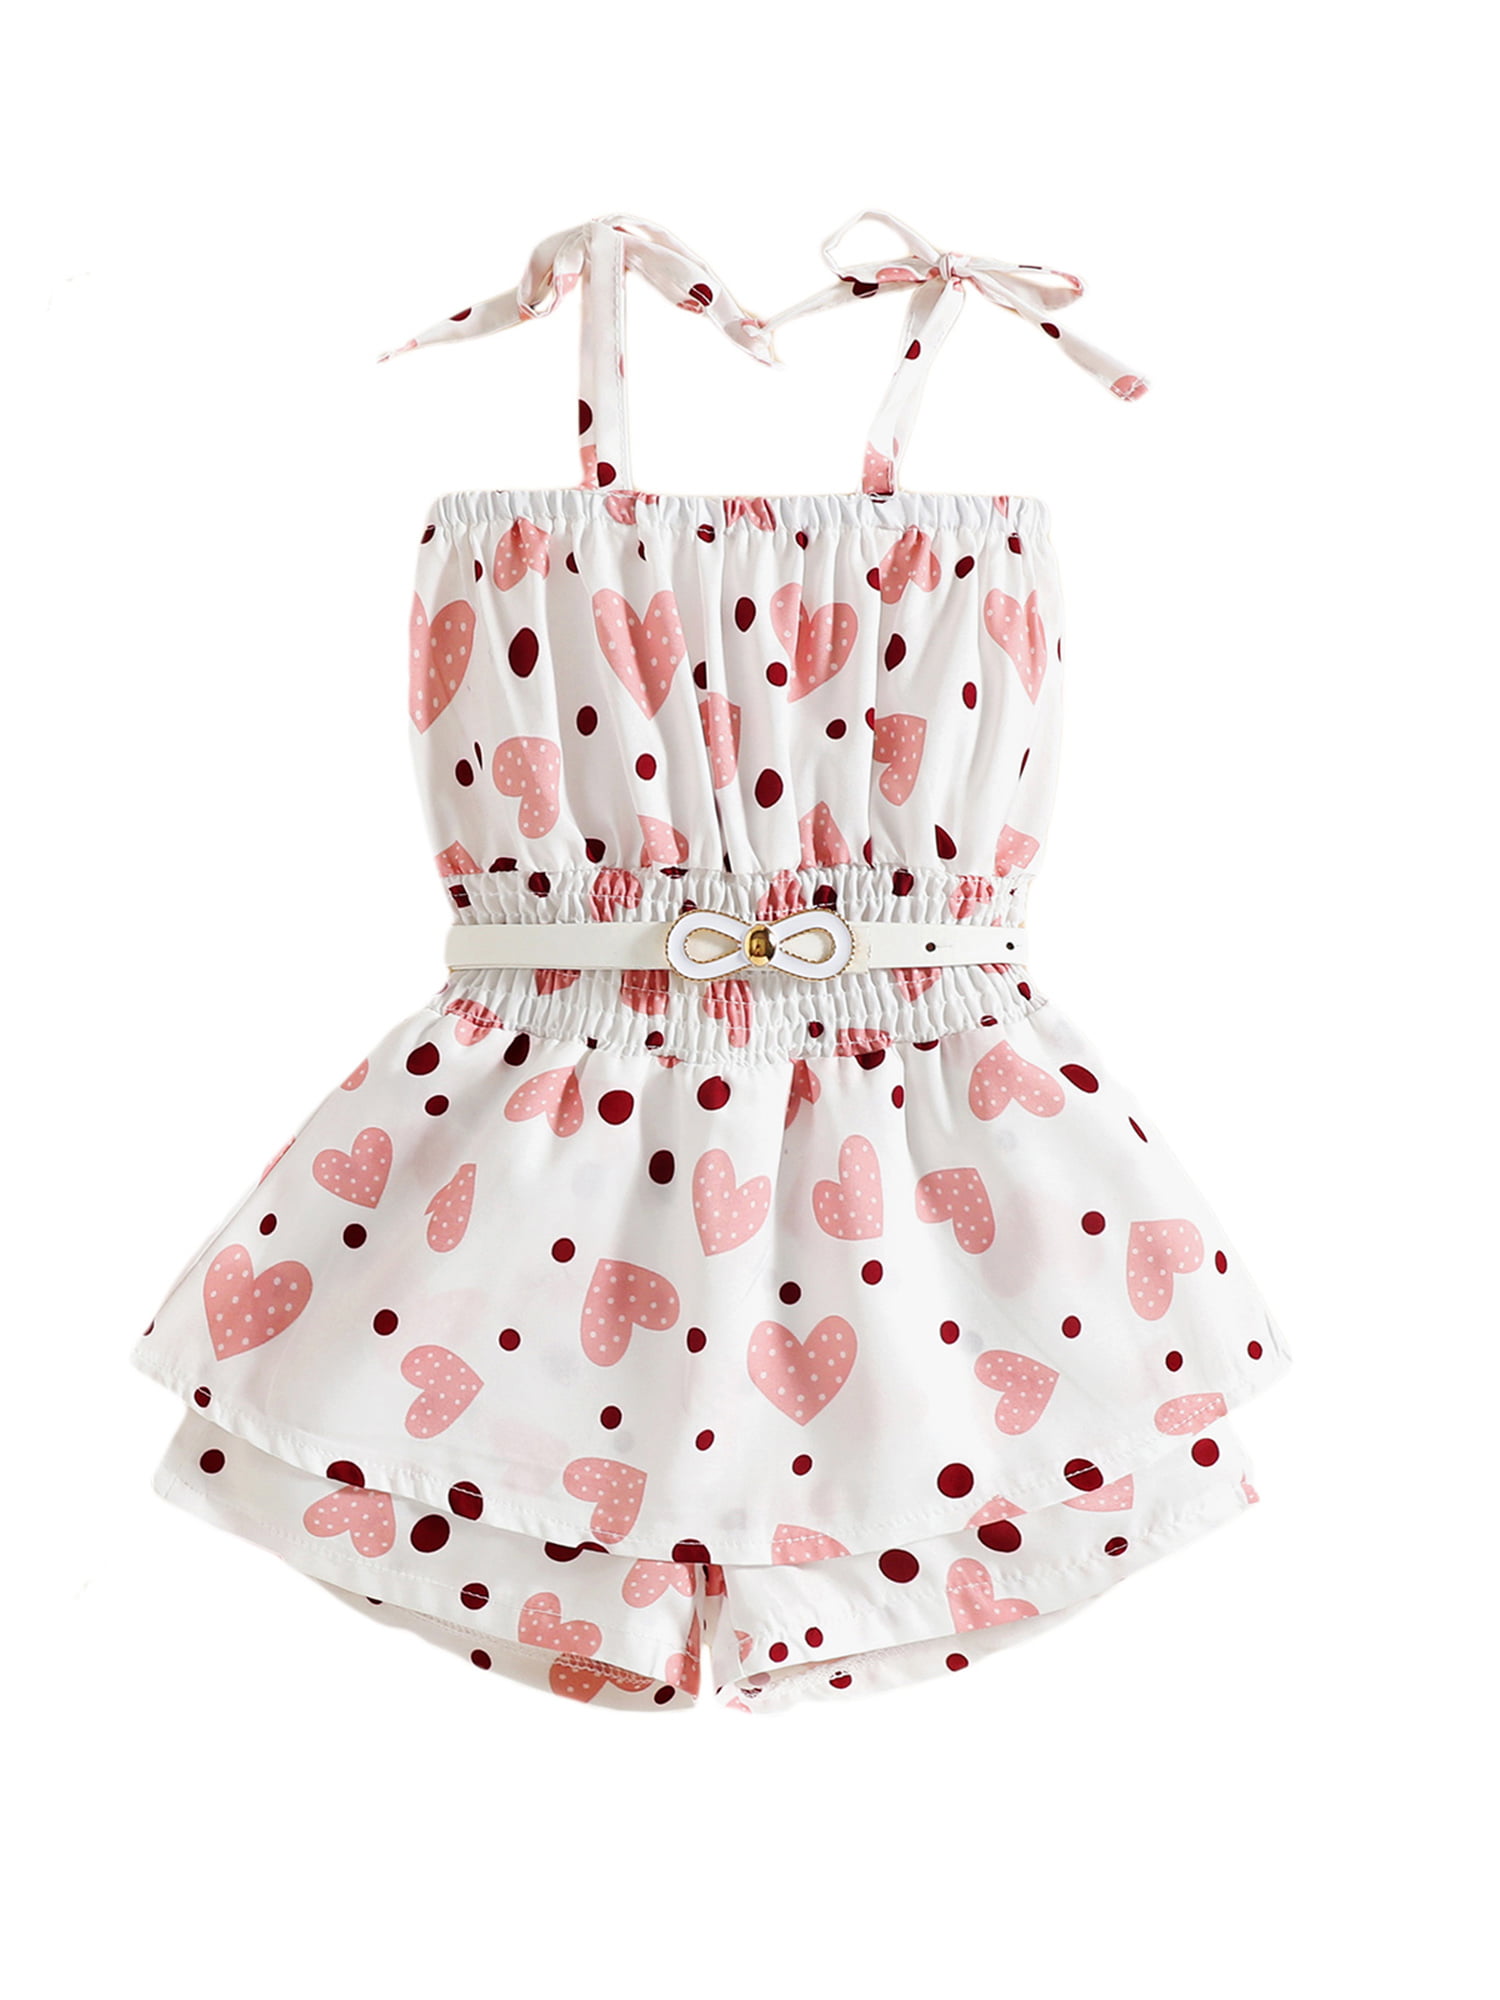 Toddler Baby Girl Summer Outfit Floral Print Self Tie Sling Short Romper Jumpsuit with Bowknot Belt 